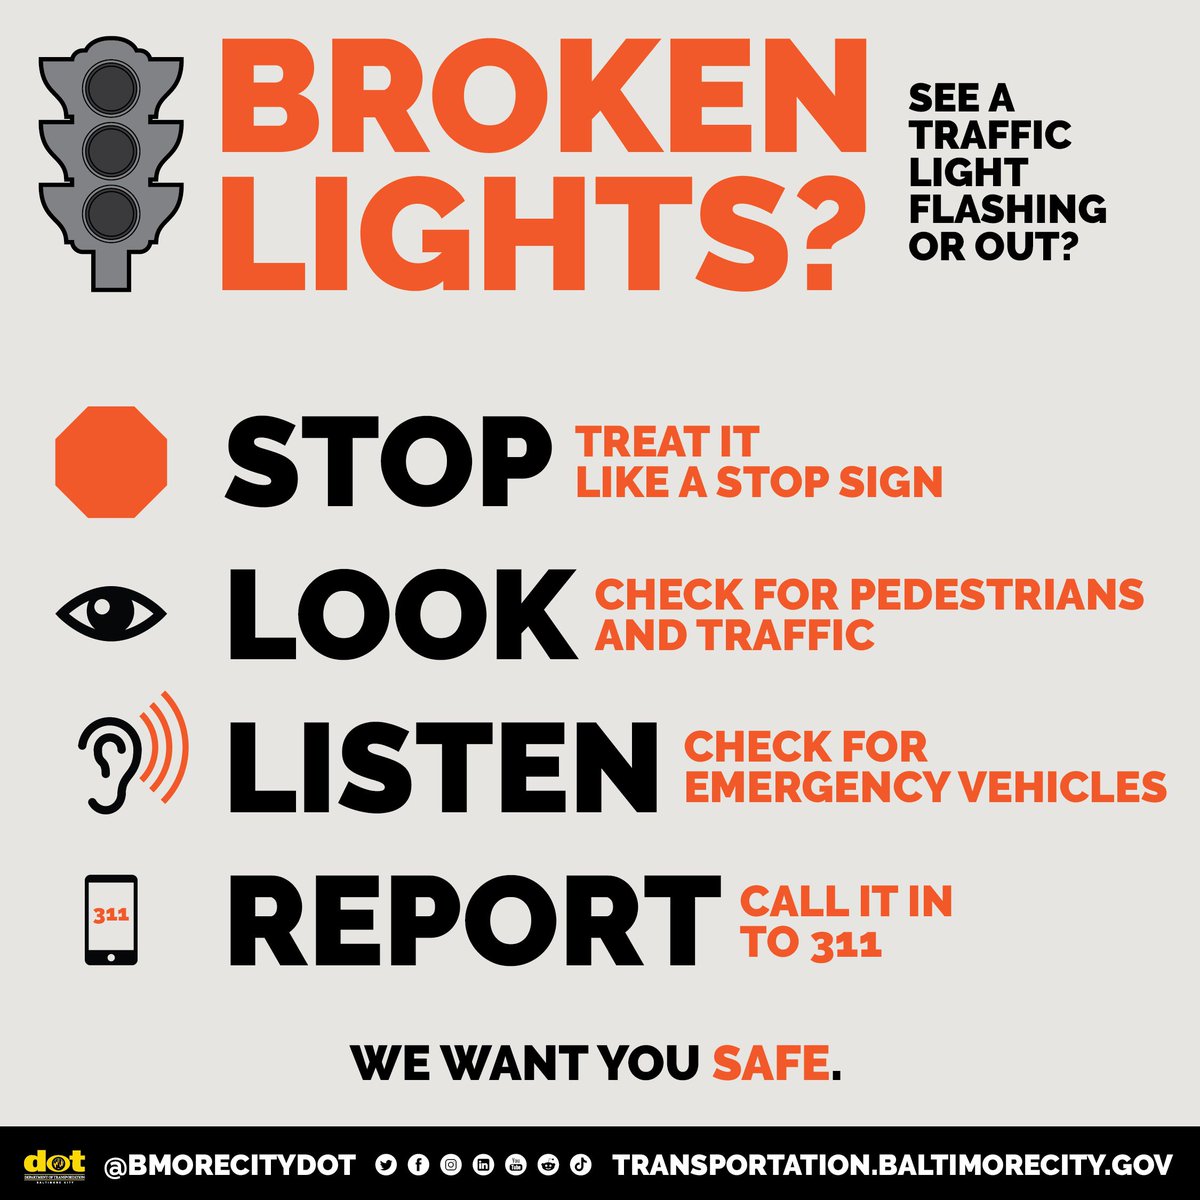 🚦Broken Lights? See a traffic light flashing or out? 🛑 STOP. Treat it like a stop sign. 👁️ LOOK. Check for pedestrians and traffic. 👂🏾 LISTEN. Check for Emergency Vehicles. 📱 REPORT. Call it in to 311. 🖤 We want you safe.